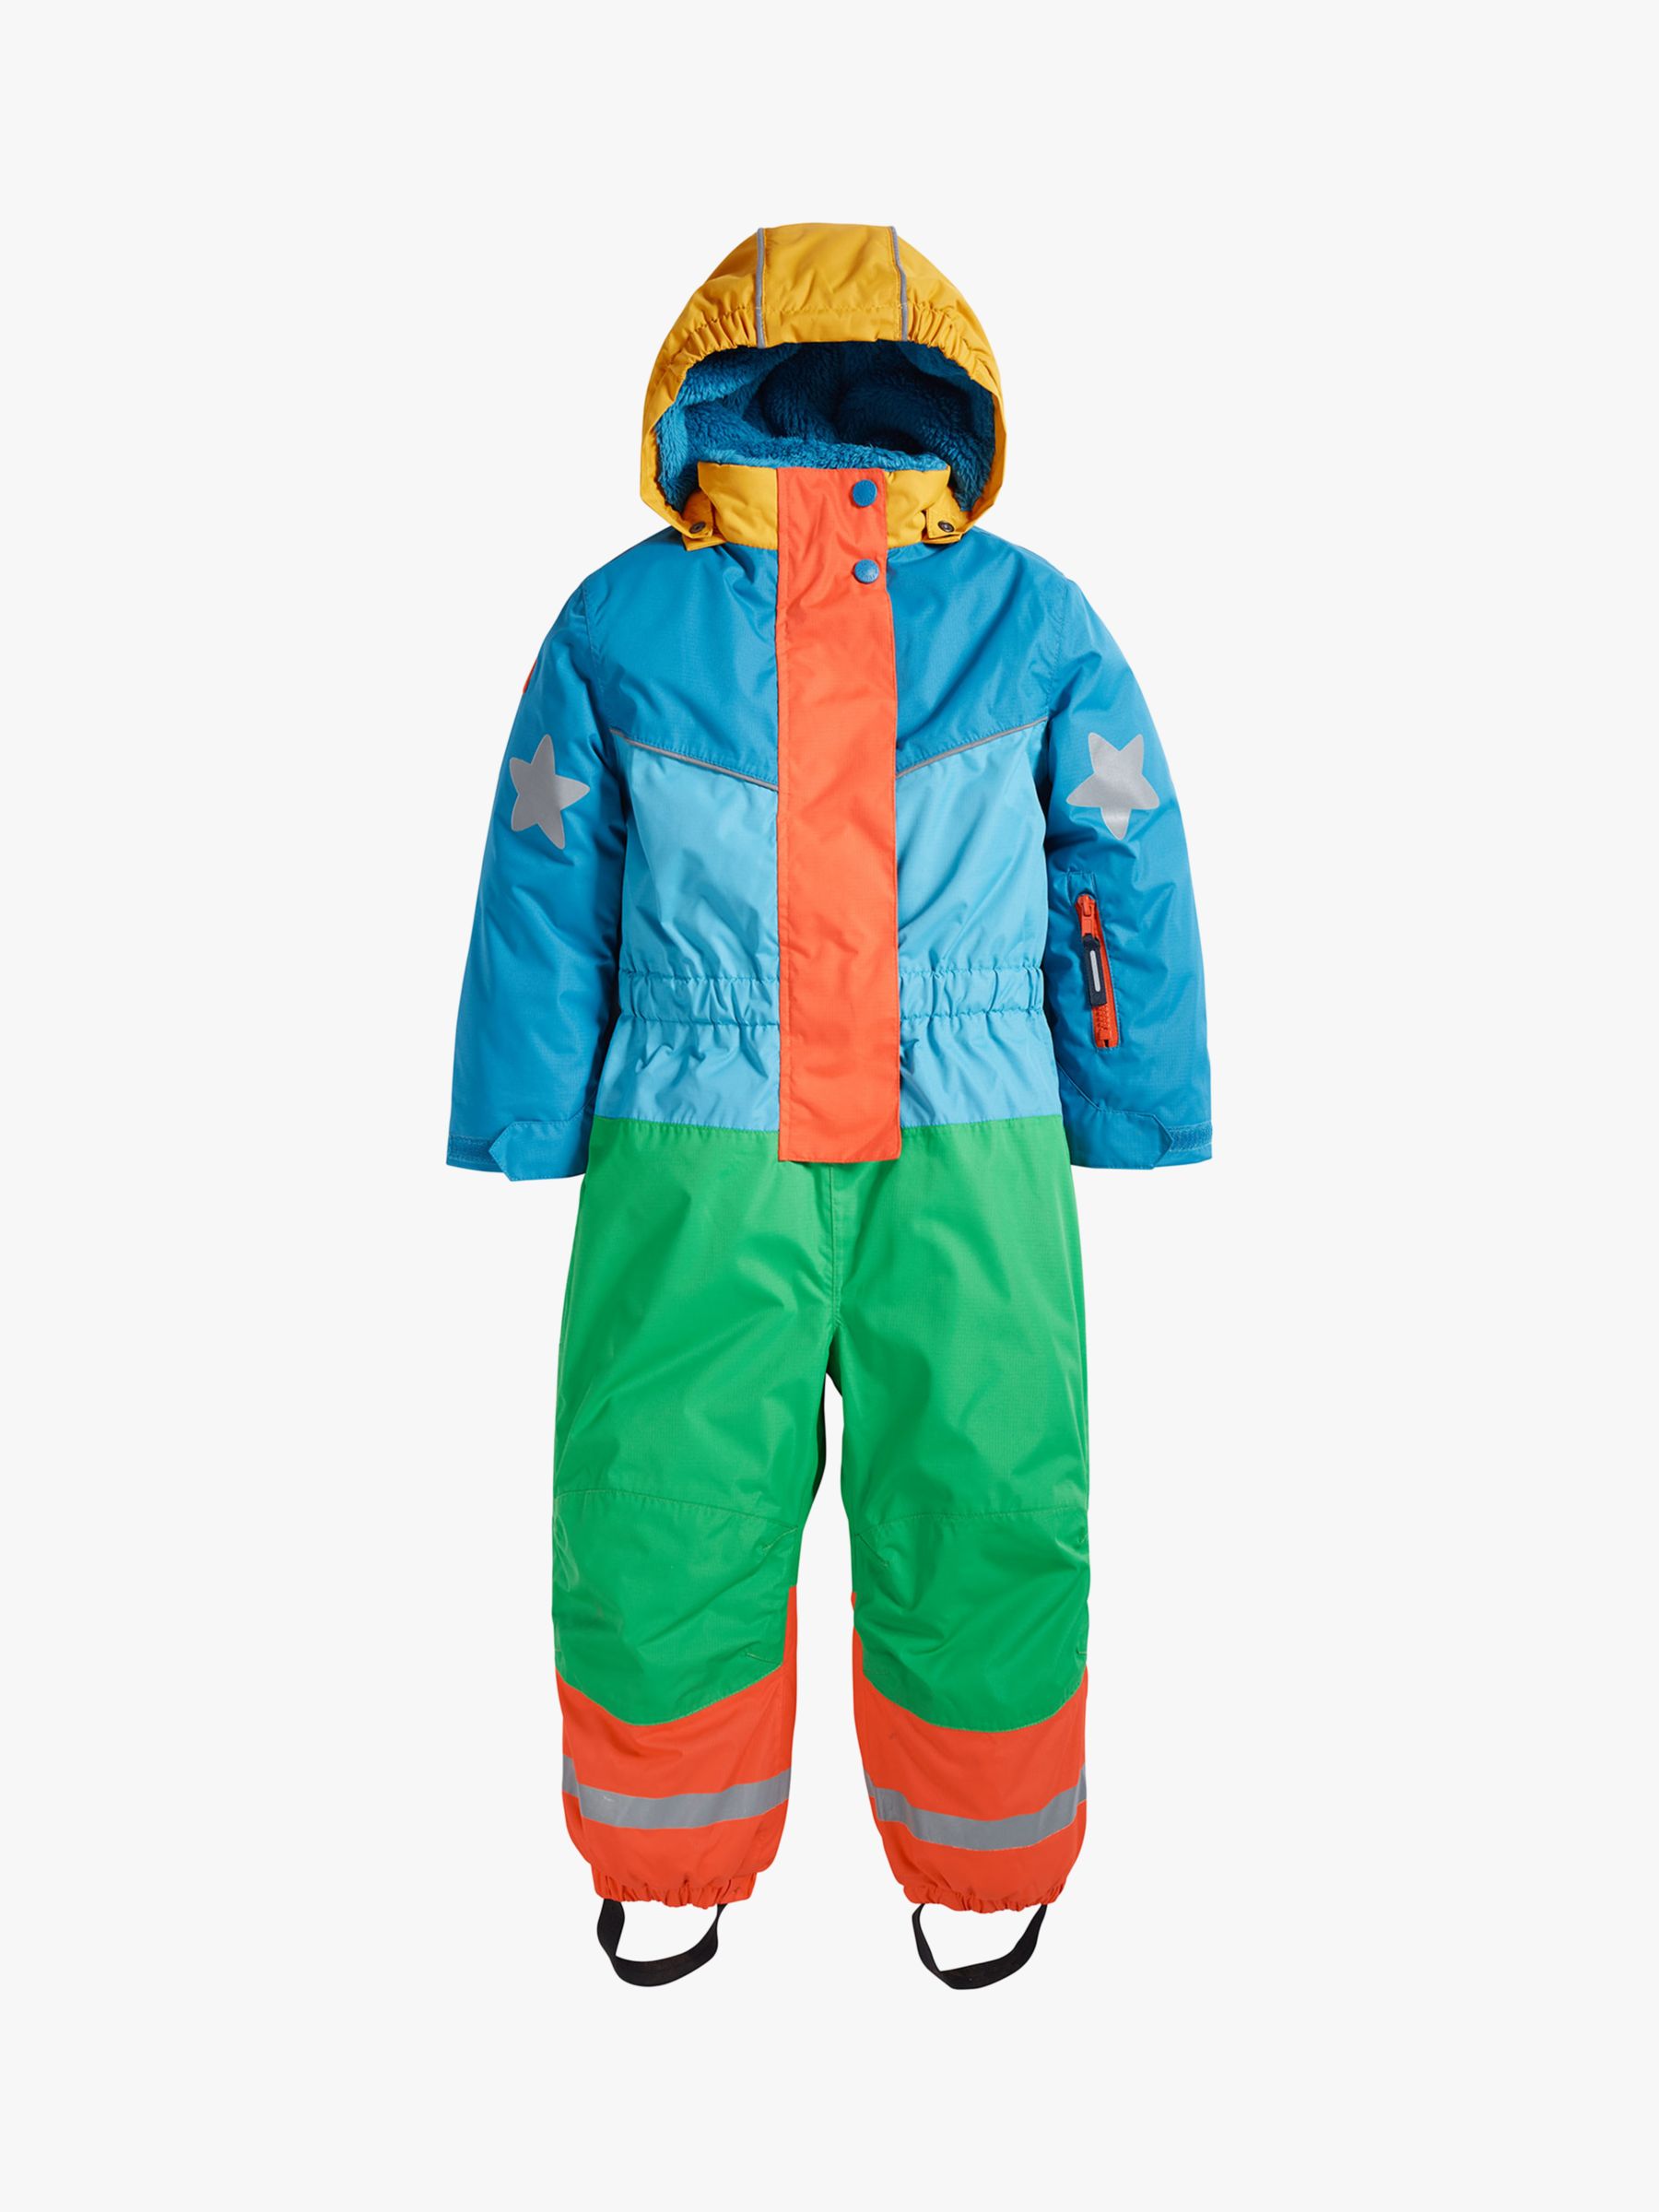 Frugi Kids' Any Weather All in One Outwear, Chunky Rainbow Stripe, 1-2 years